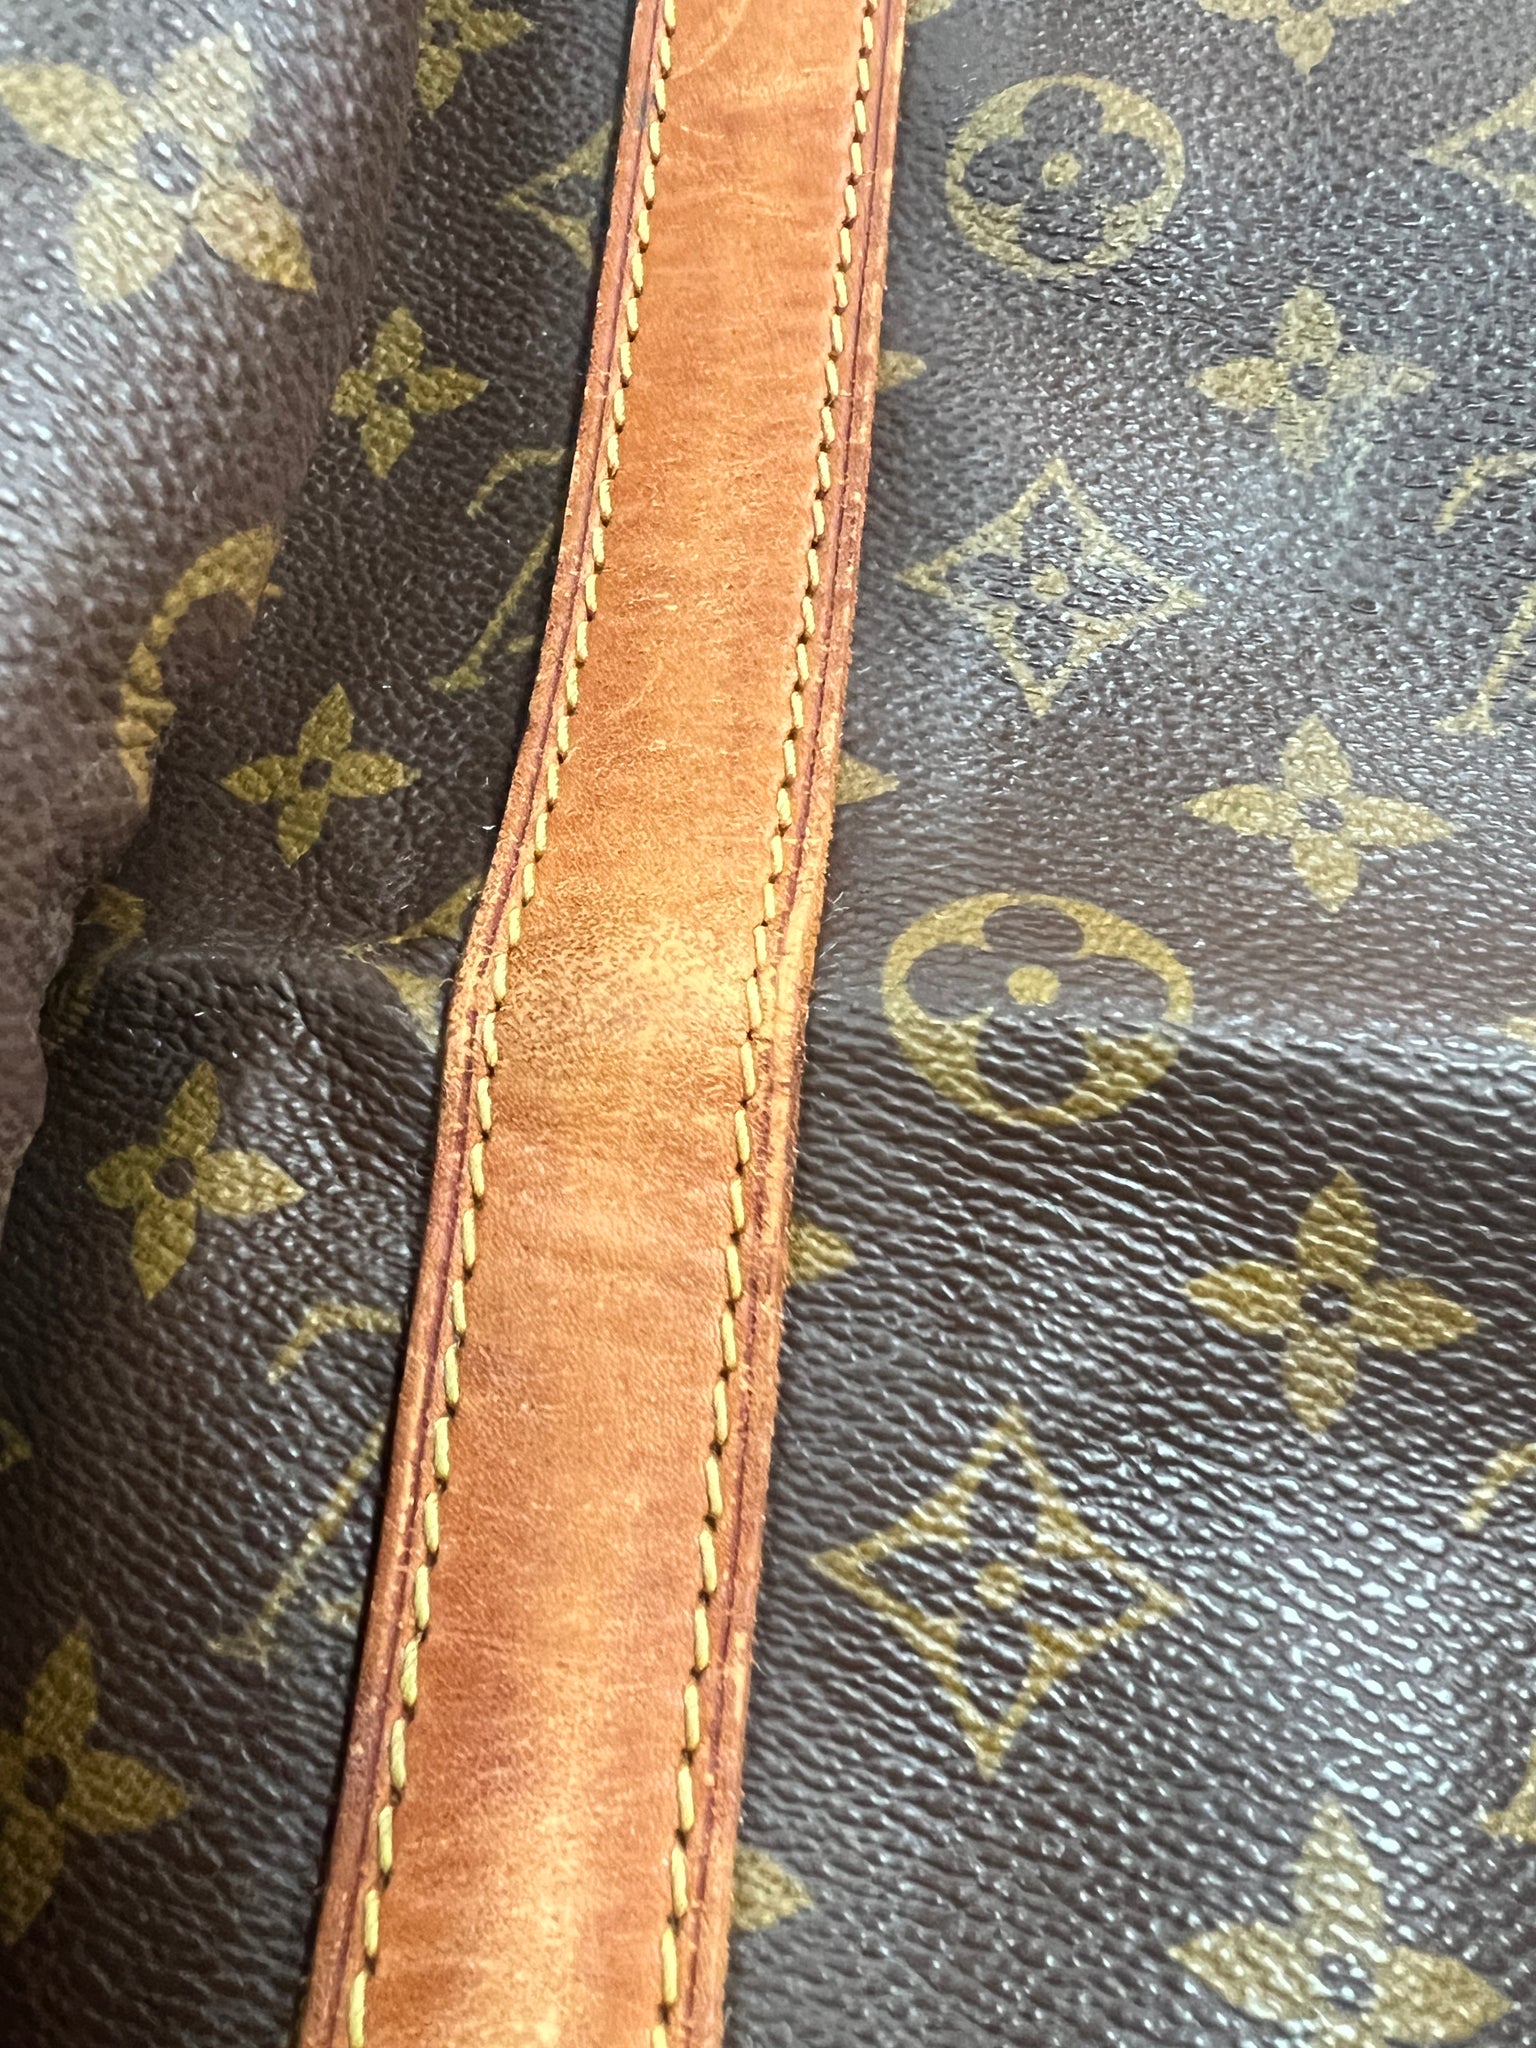 Authentic Preloved Louis Vuitton French Company Vintage Weekender Bag